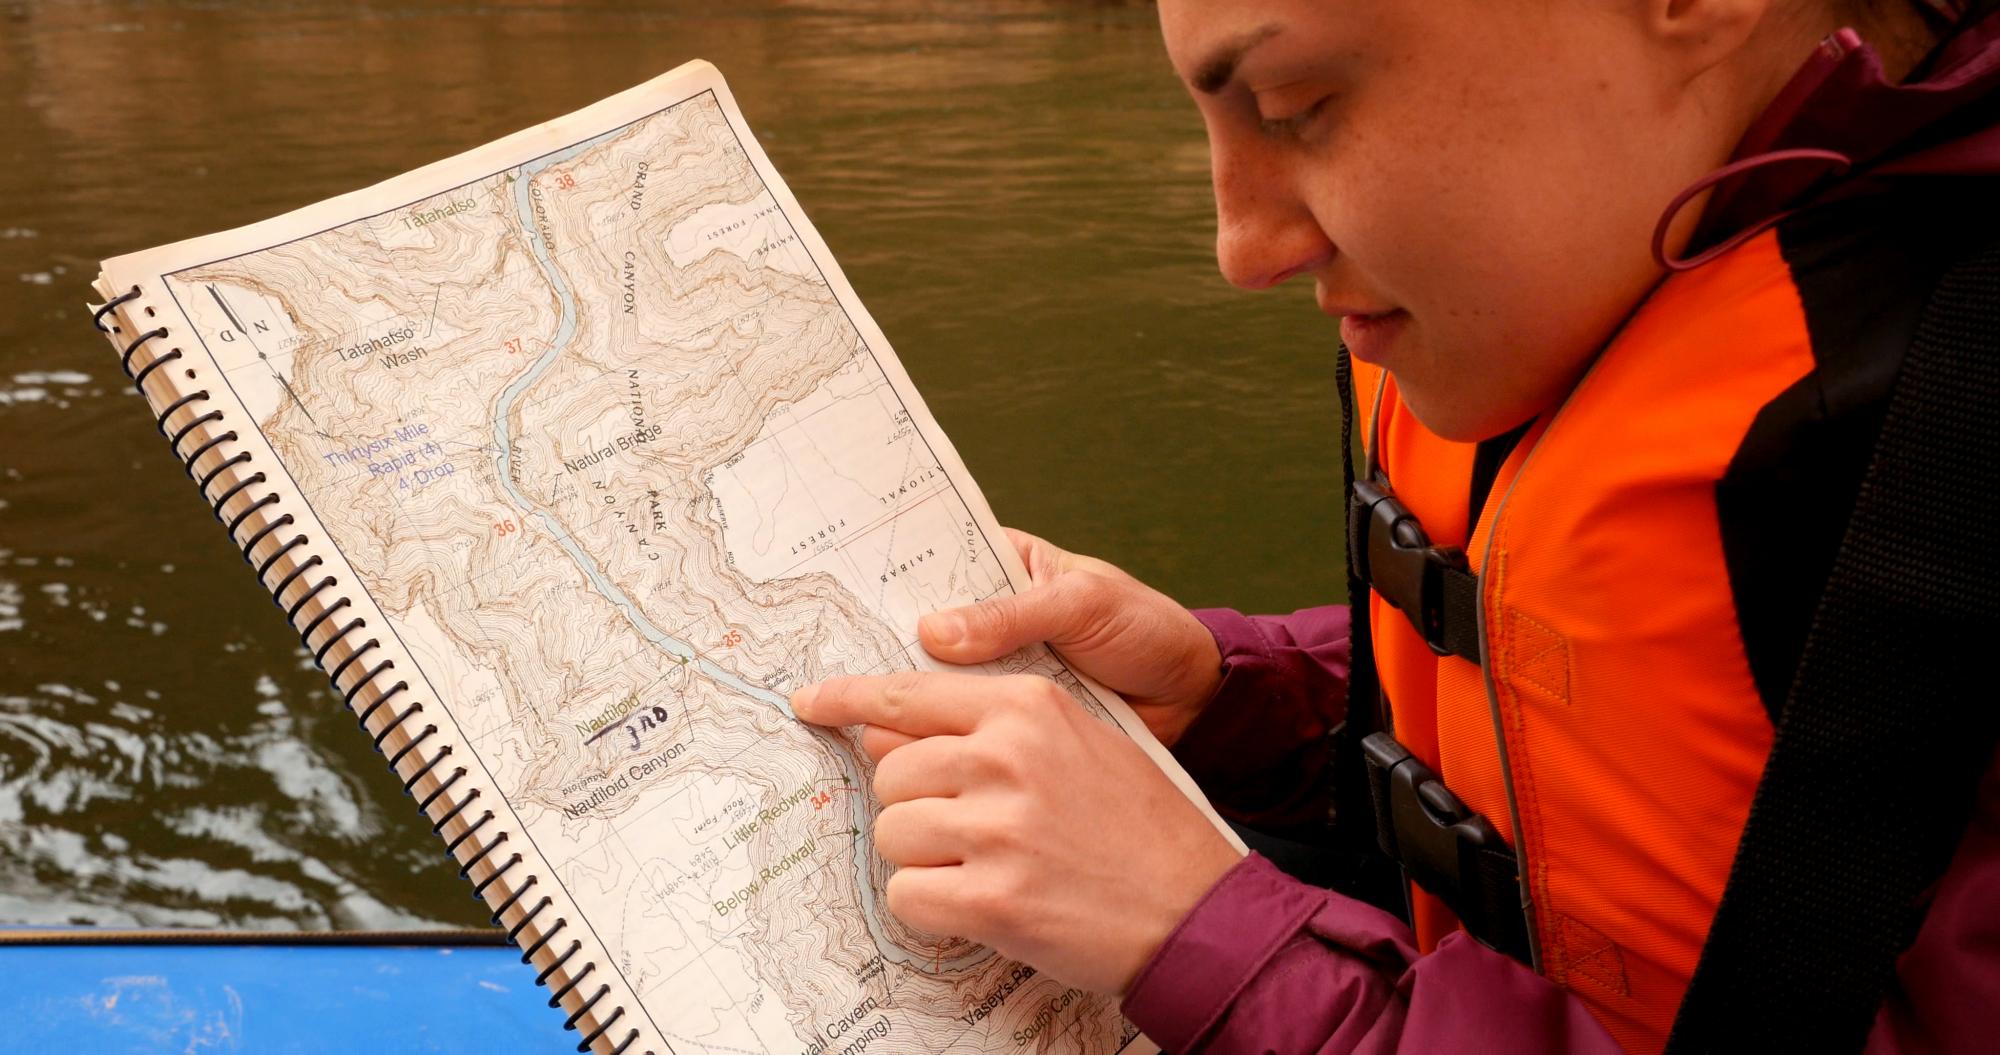 Woman looks at map of Colorado River while on a river raft